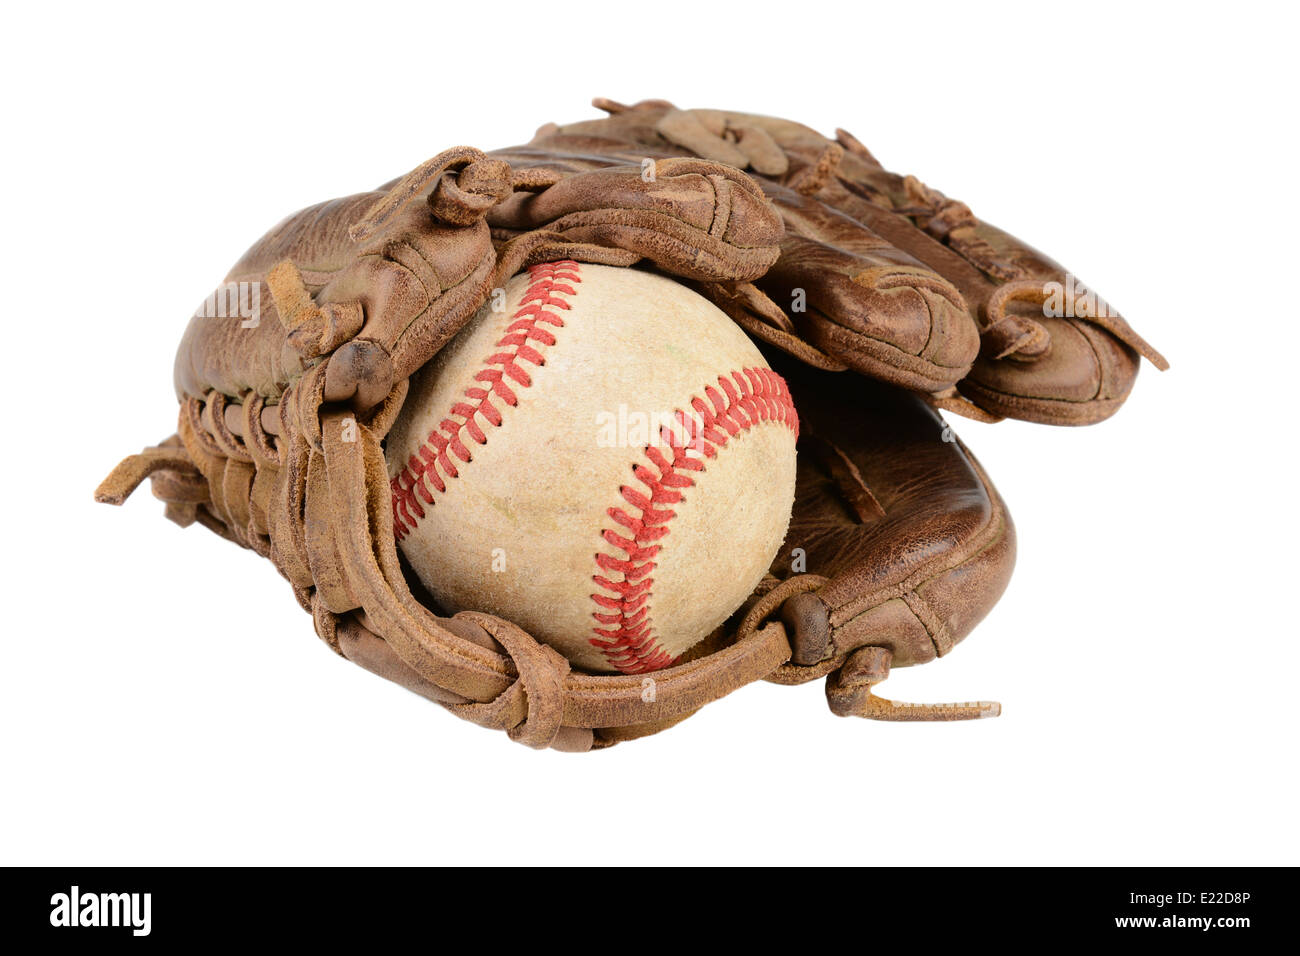 Closeup of a baseball glove and ball isolated on white. Stock Photo